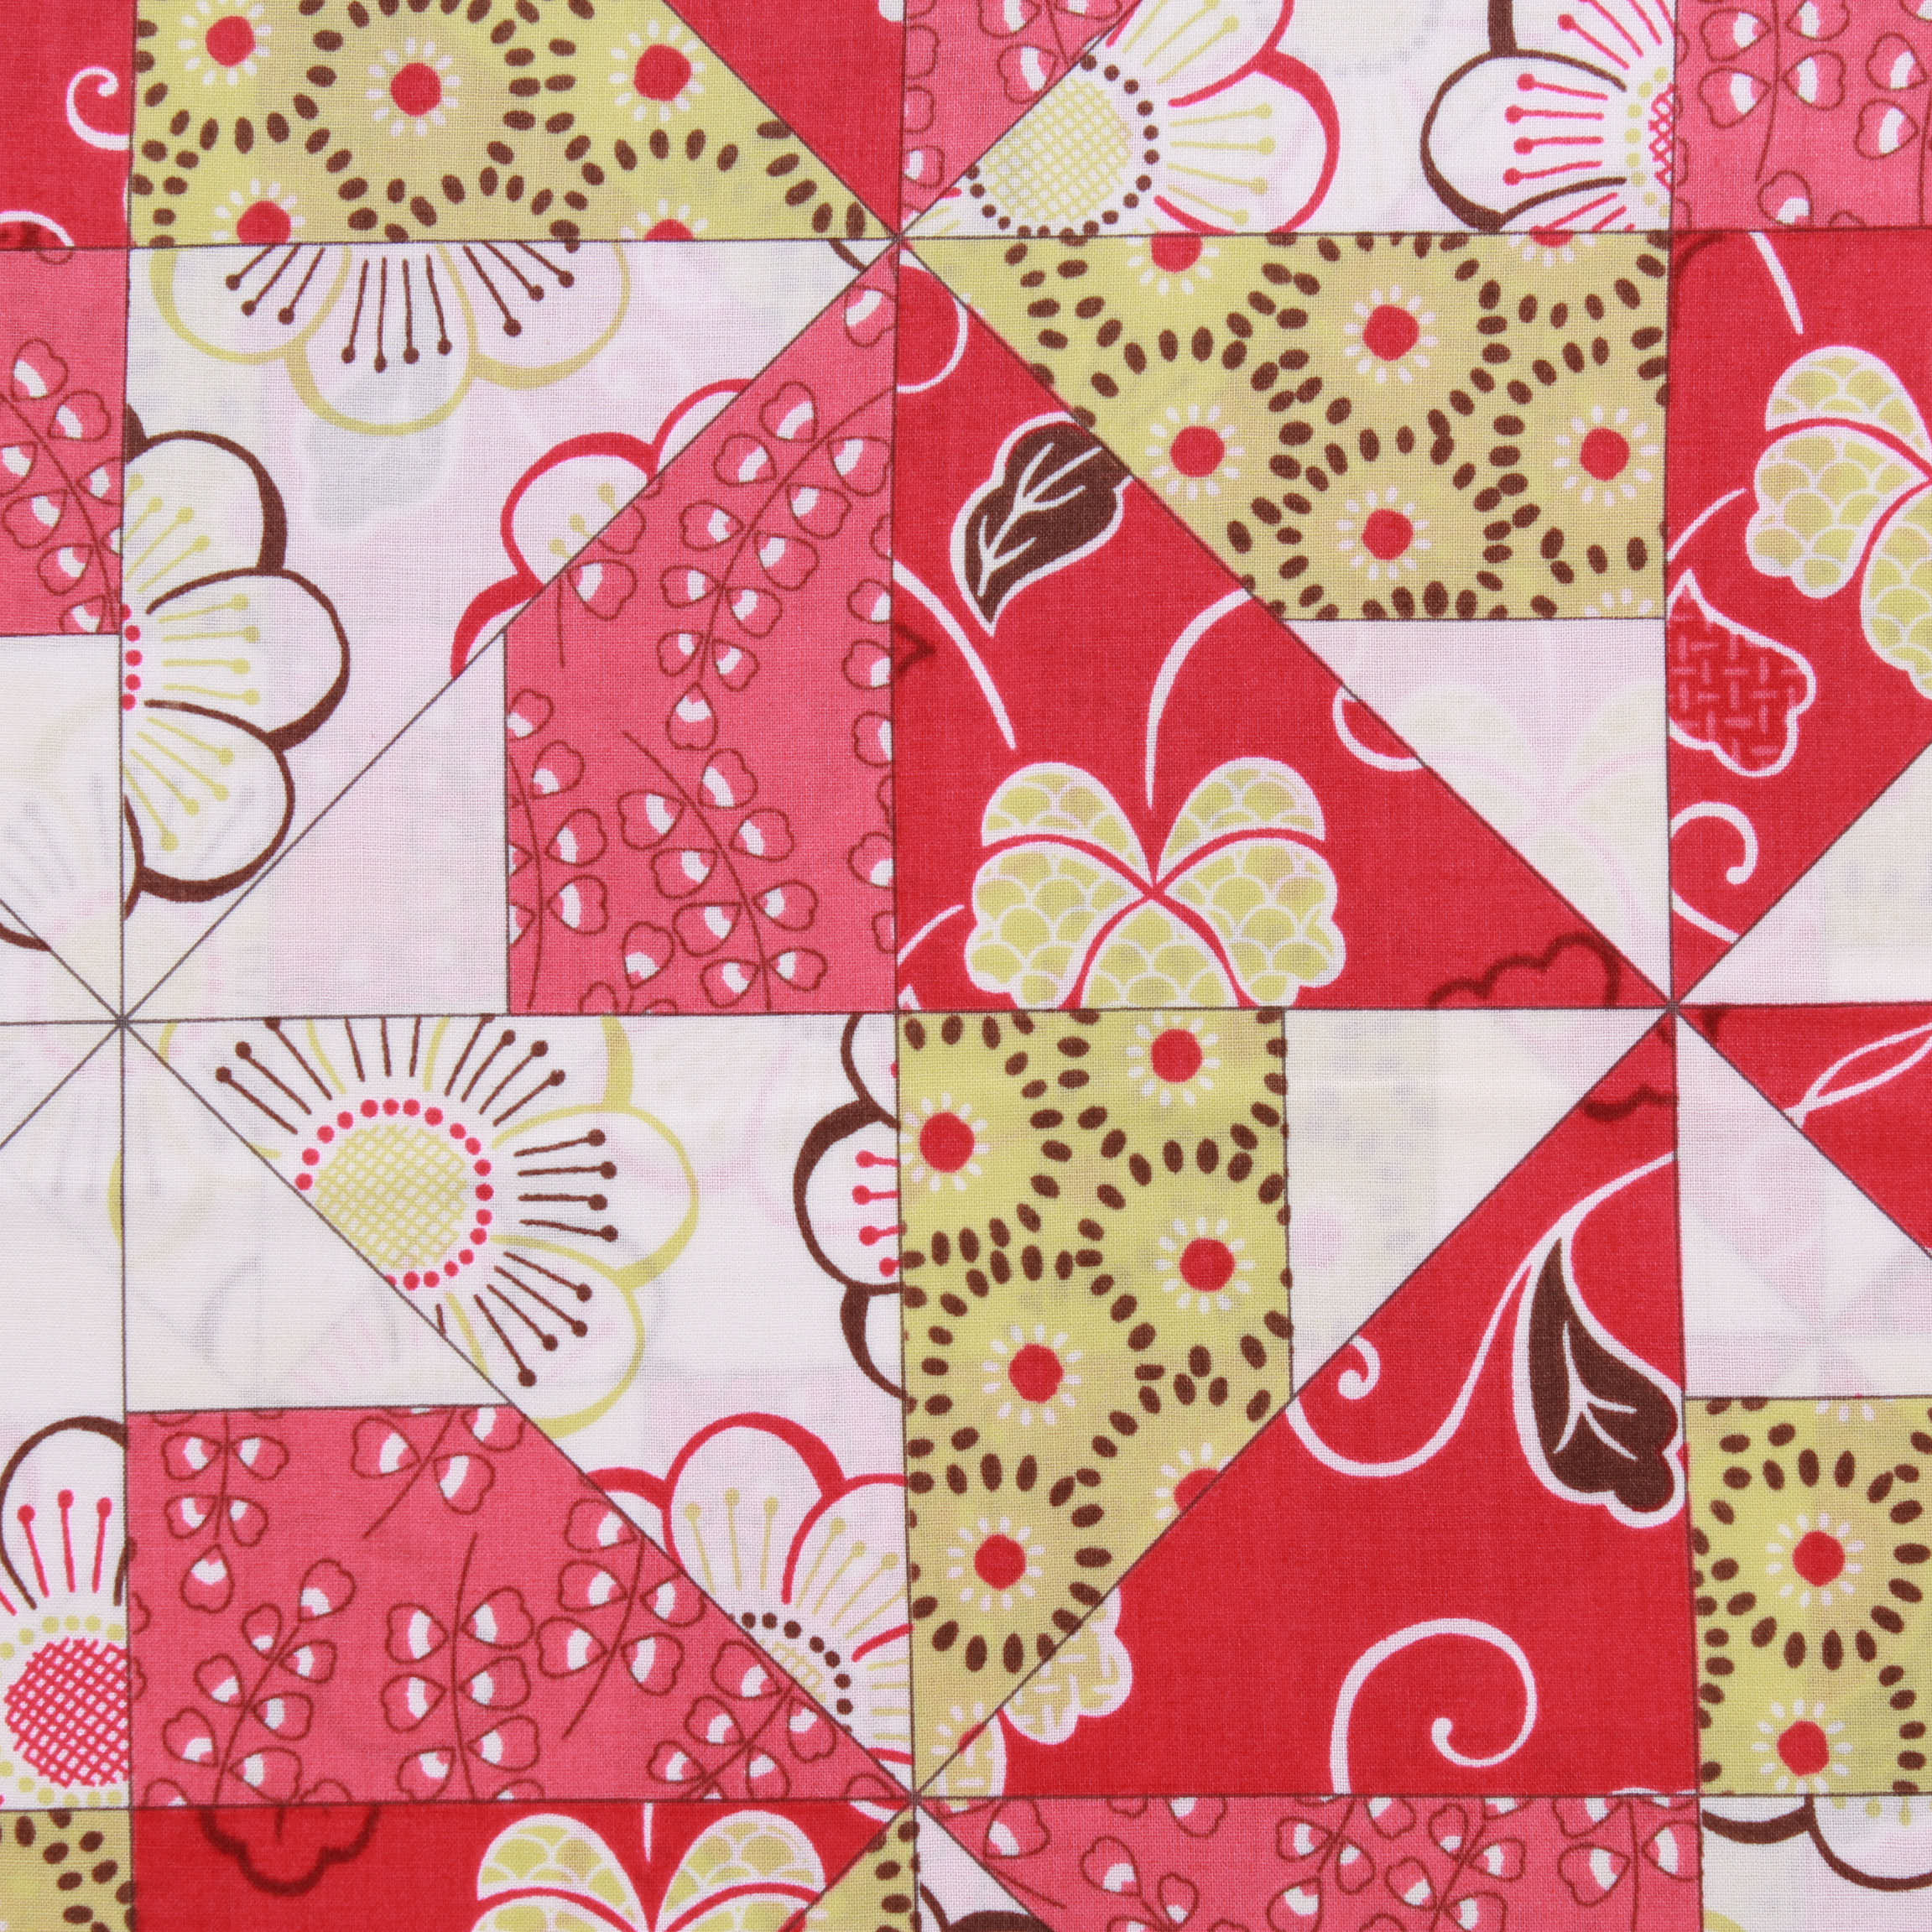 100% Cotton Lawn, 'Red Geometric Ditsy Floral', 58" Wide